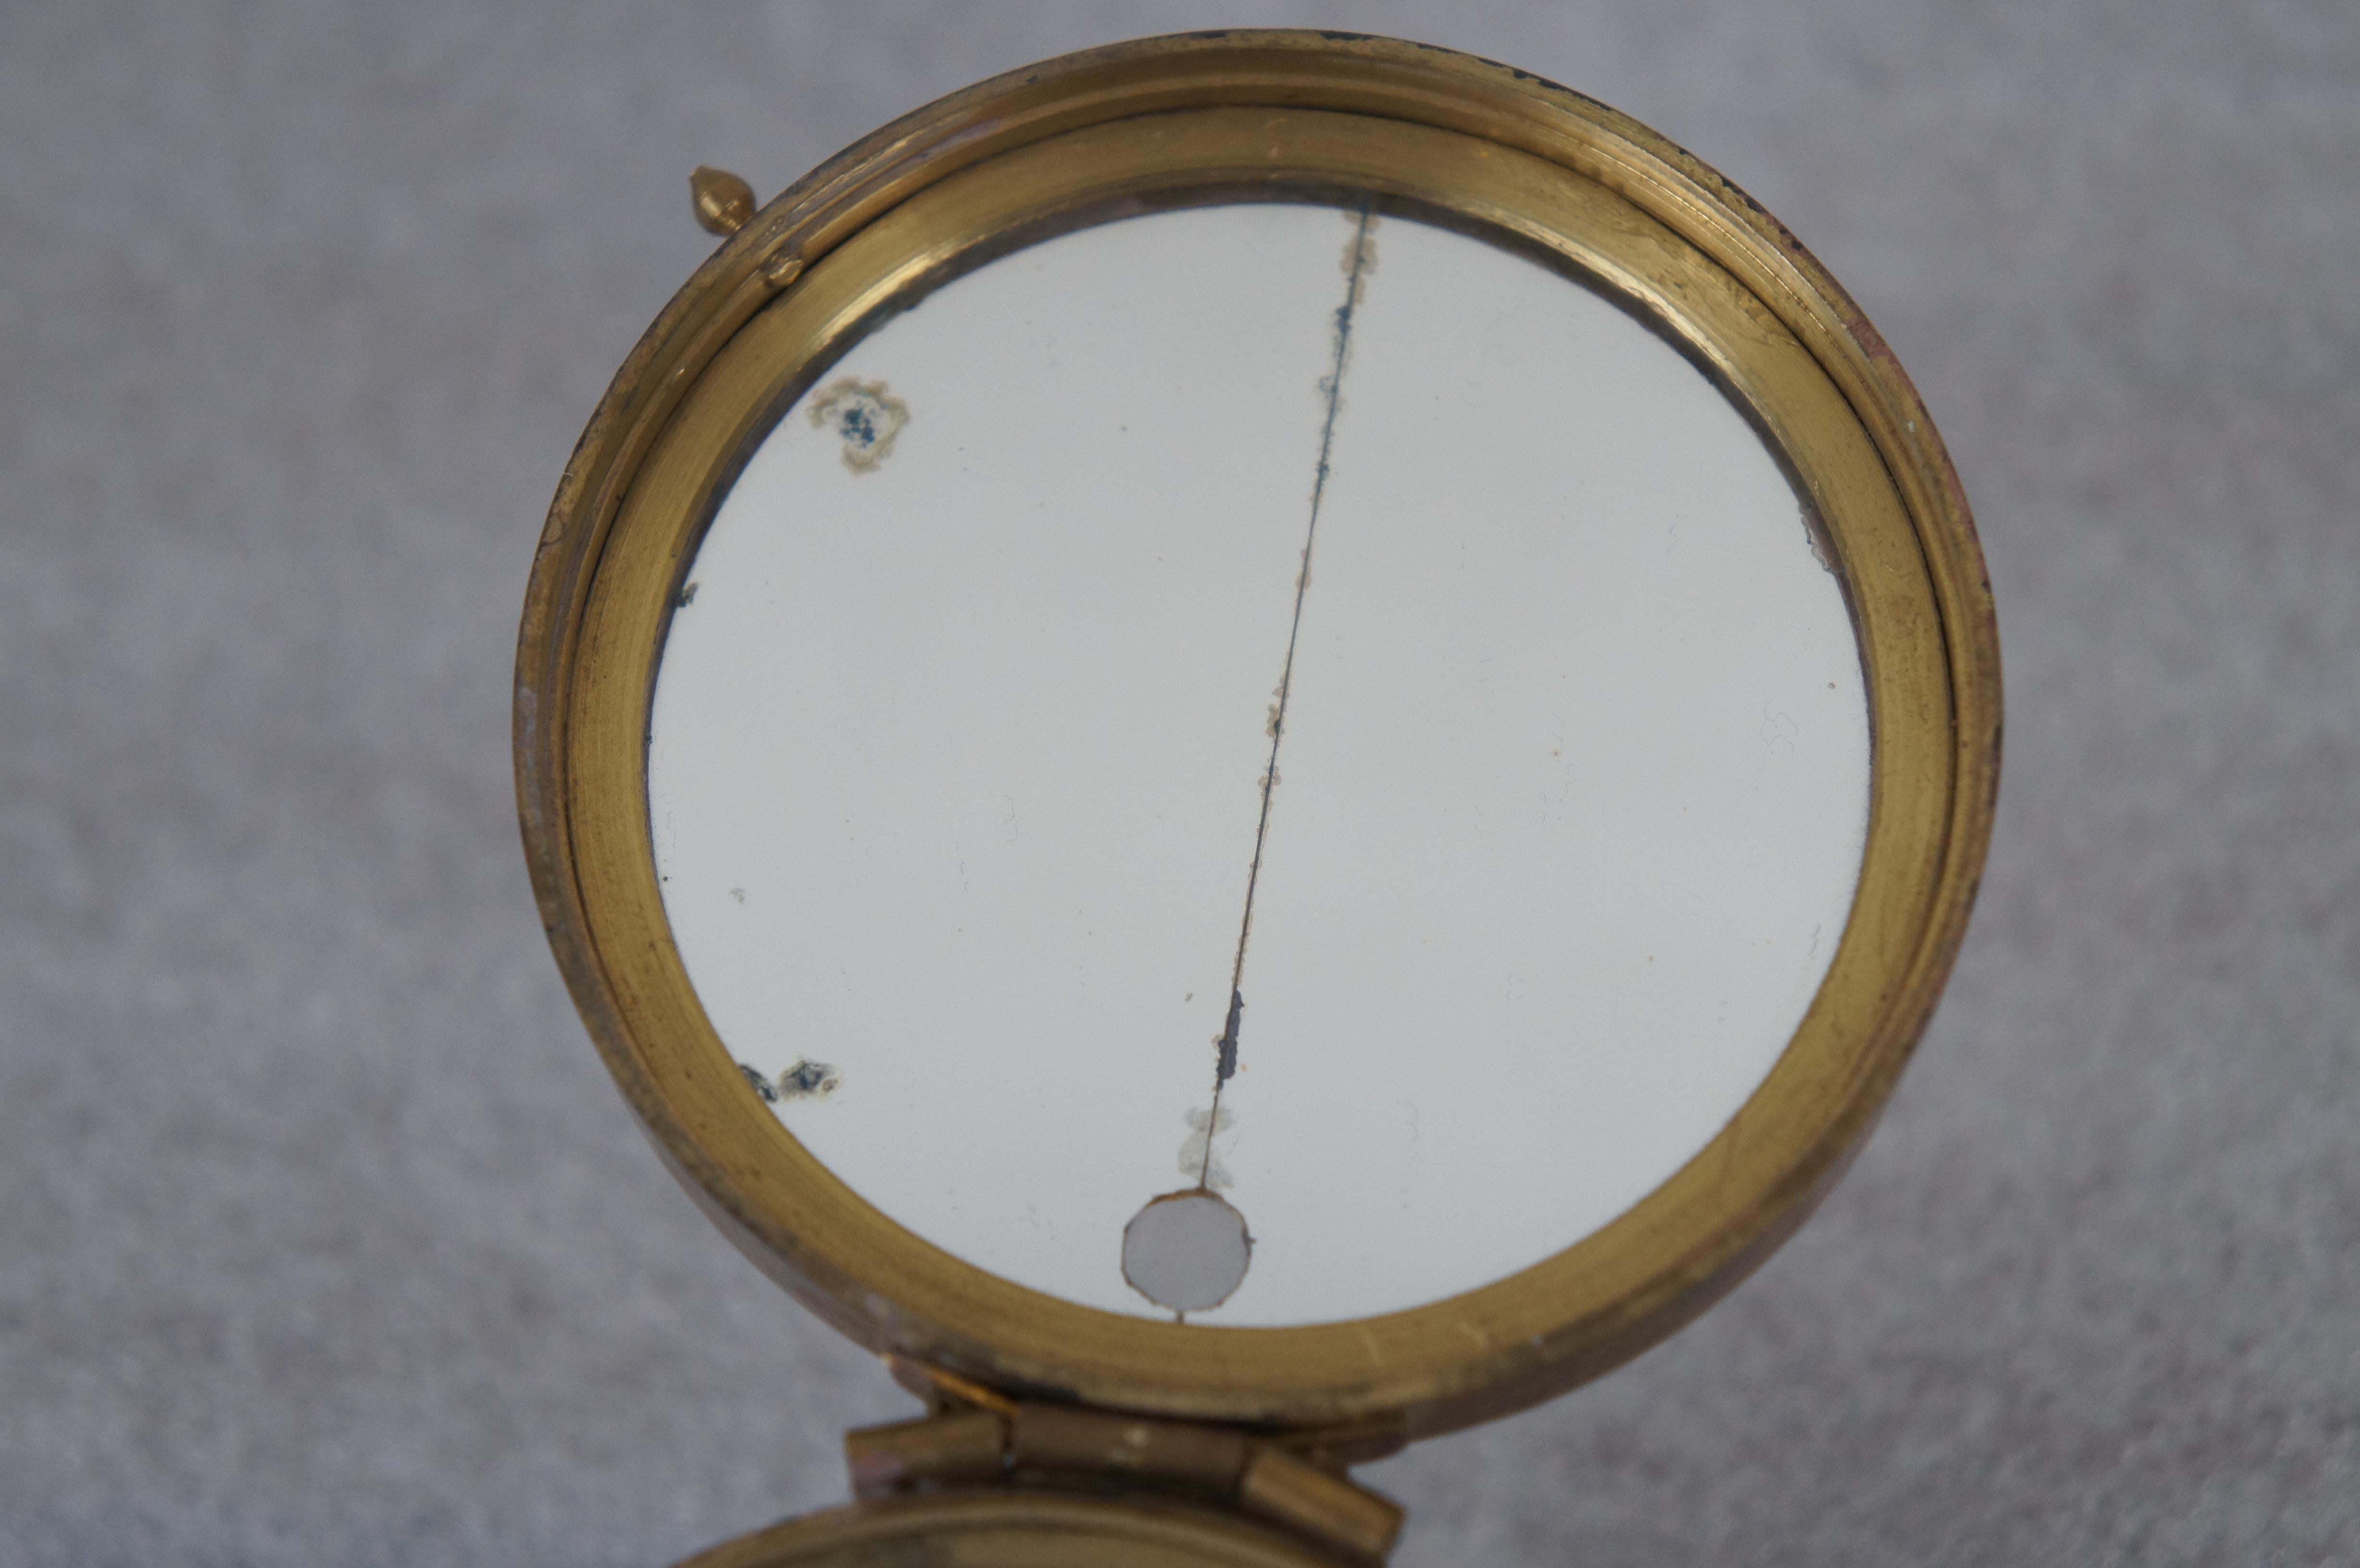 T. Cooke London Brass Prismatic Nautical Navigation Compass with Stand  In Good Condition For Sale In Dayton, OH